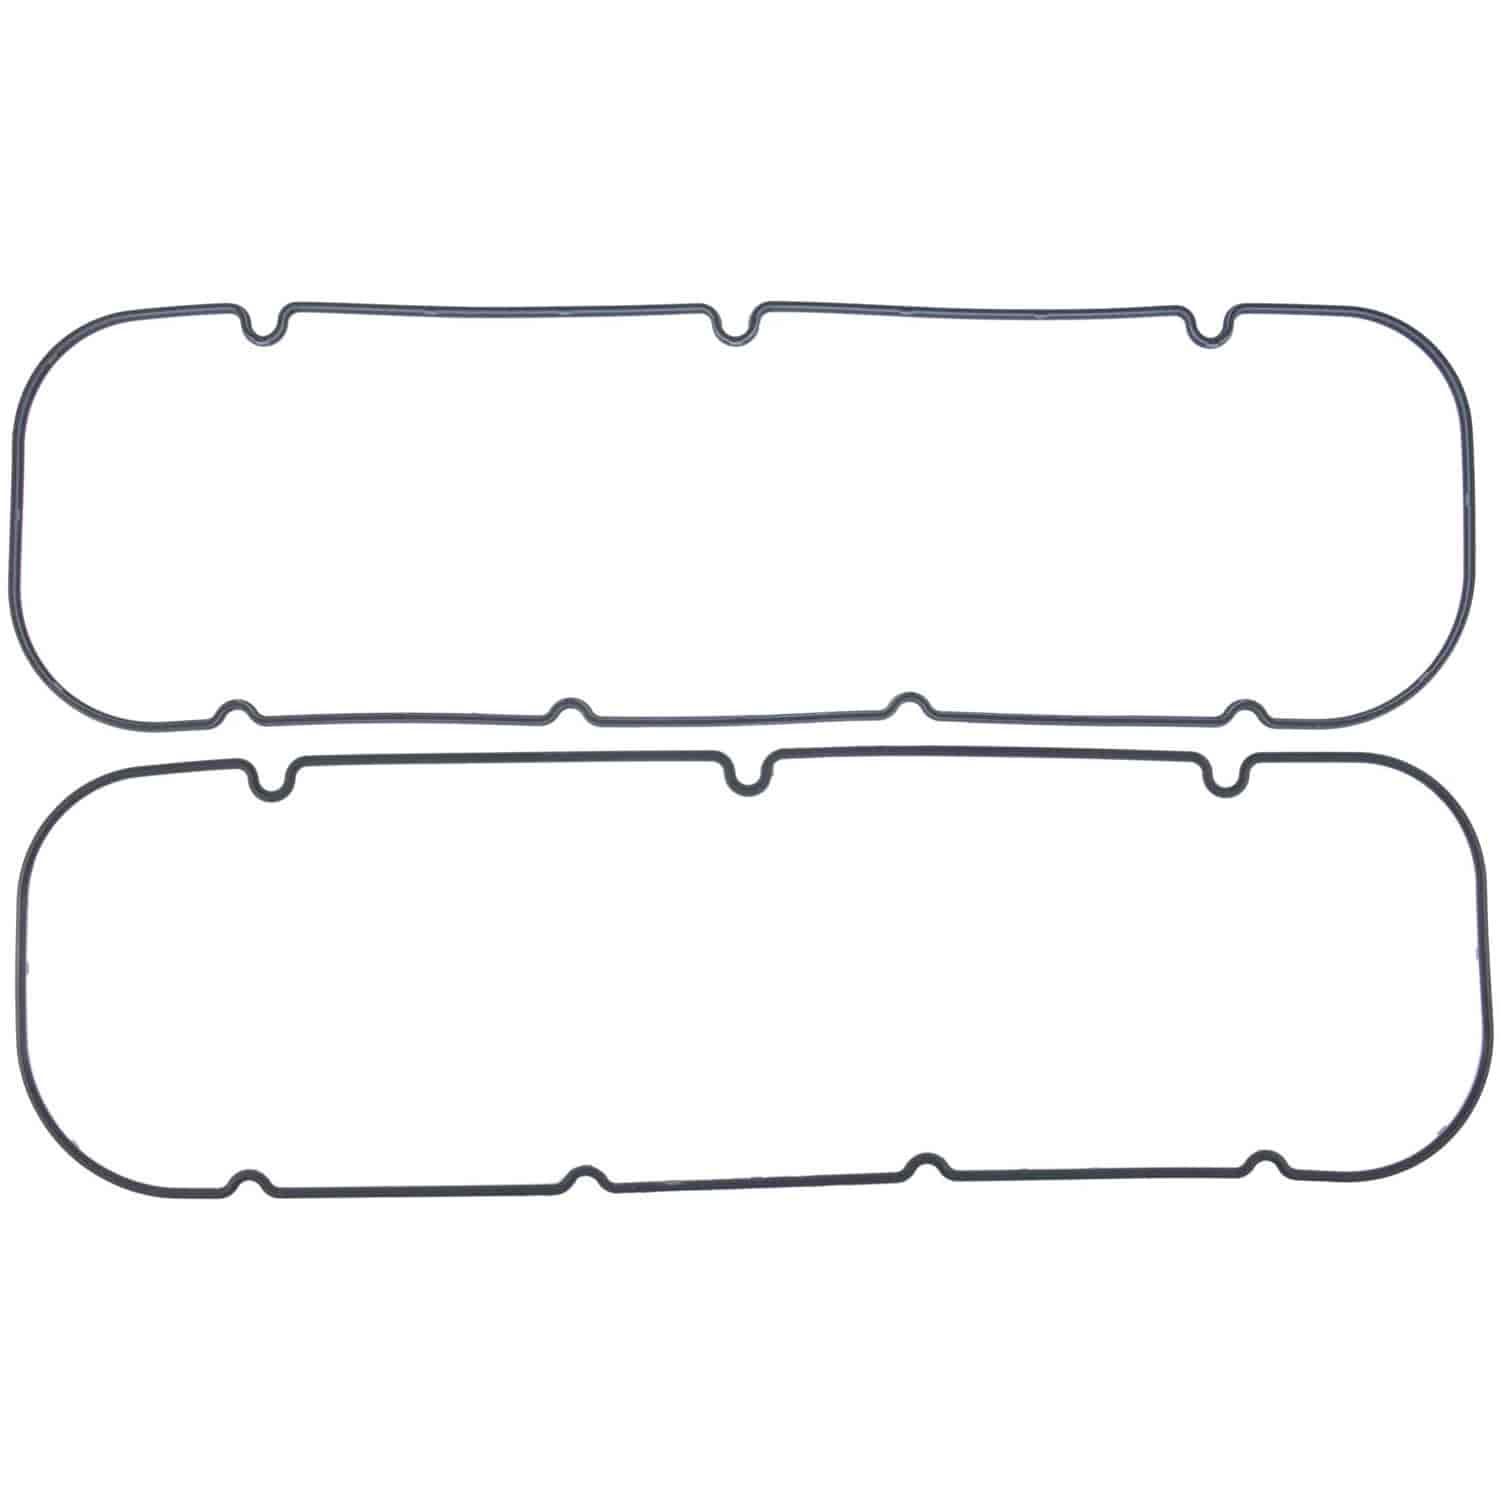 Valve Cover Gasket Set 1991-2000 Big Block Chevy 366/427/454 (6.0/7.0/7.4L) in Molded Rubber